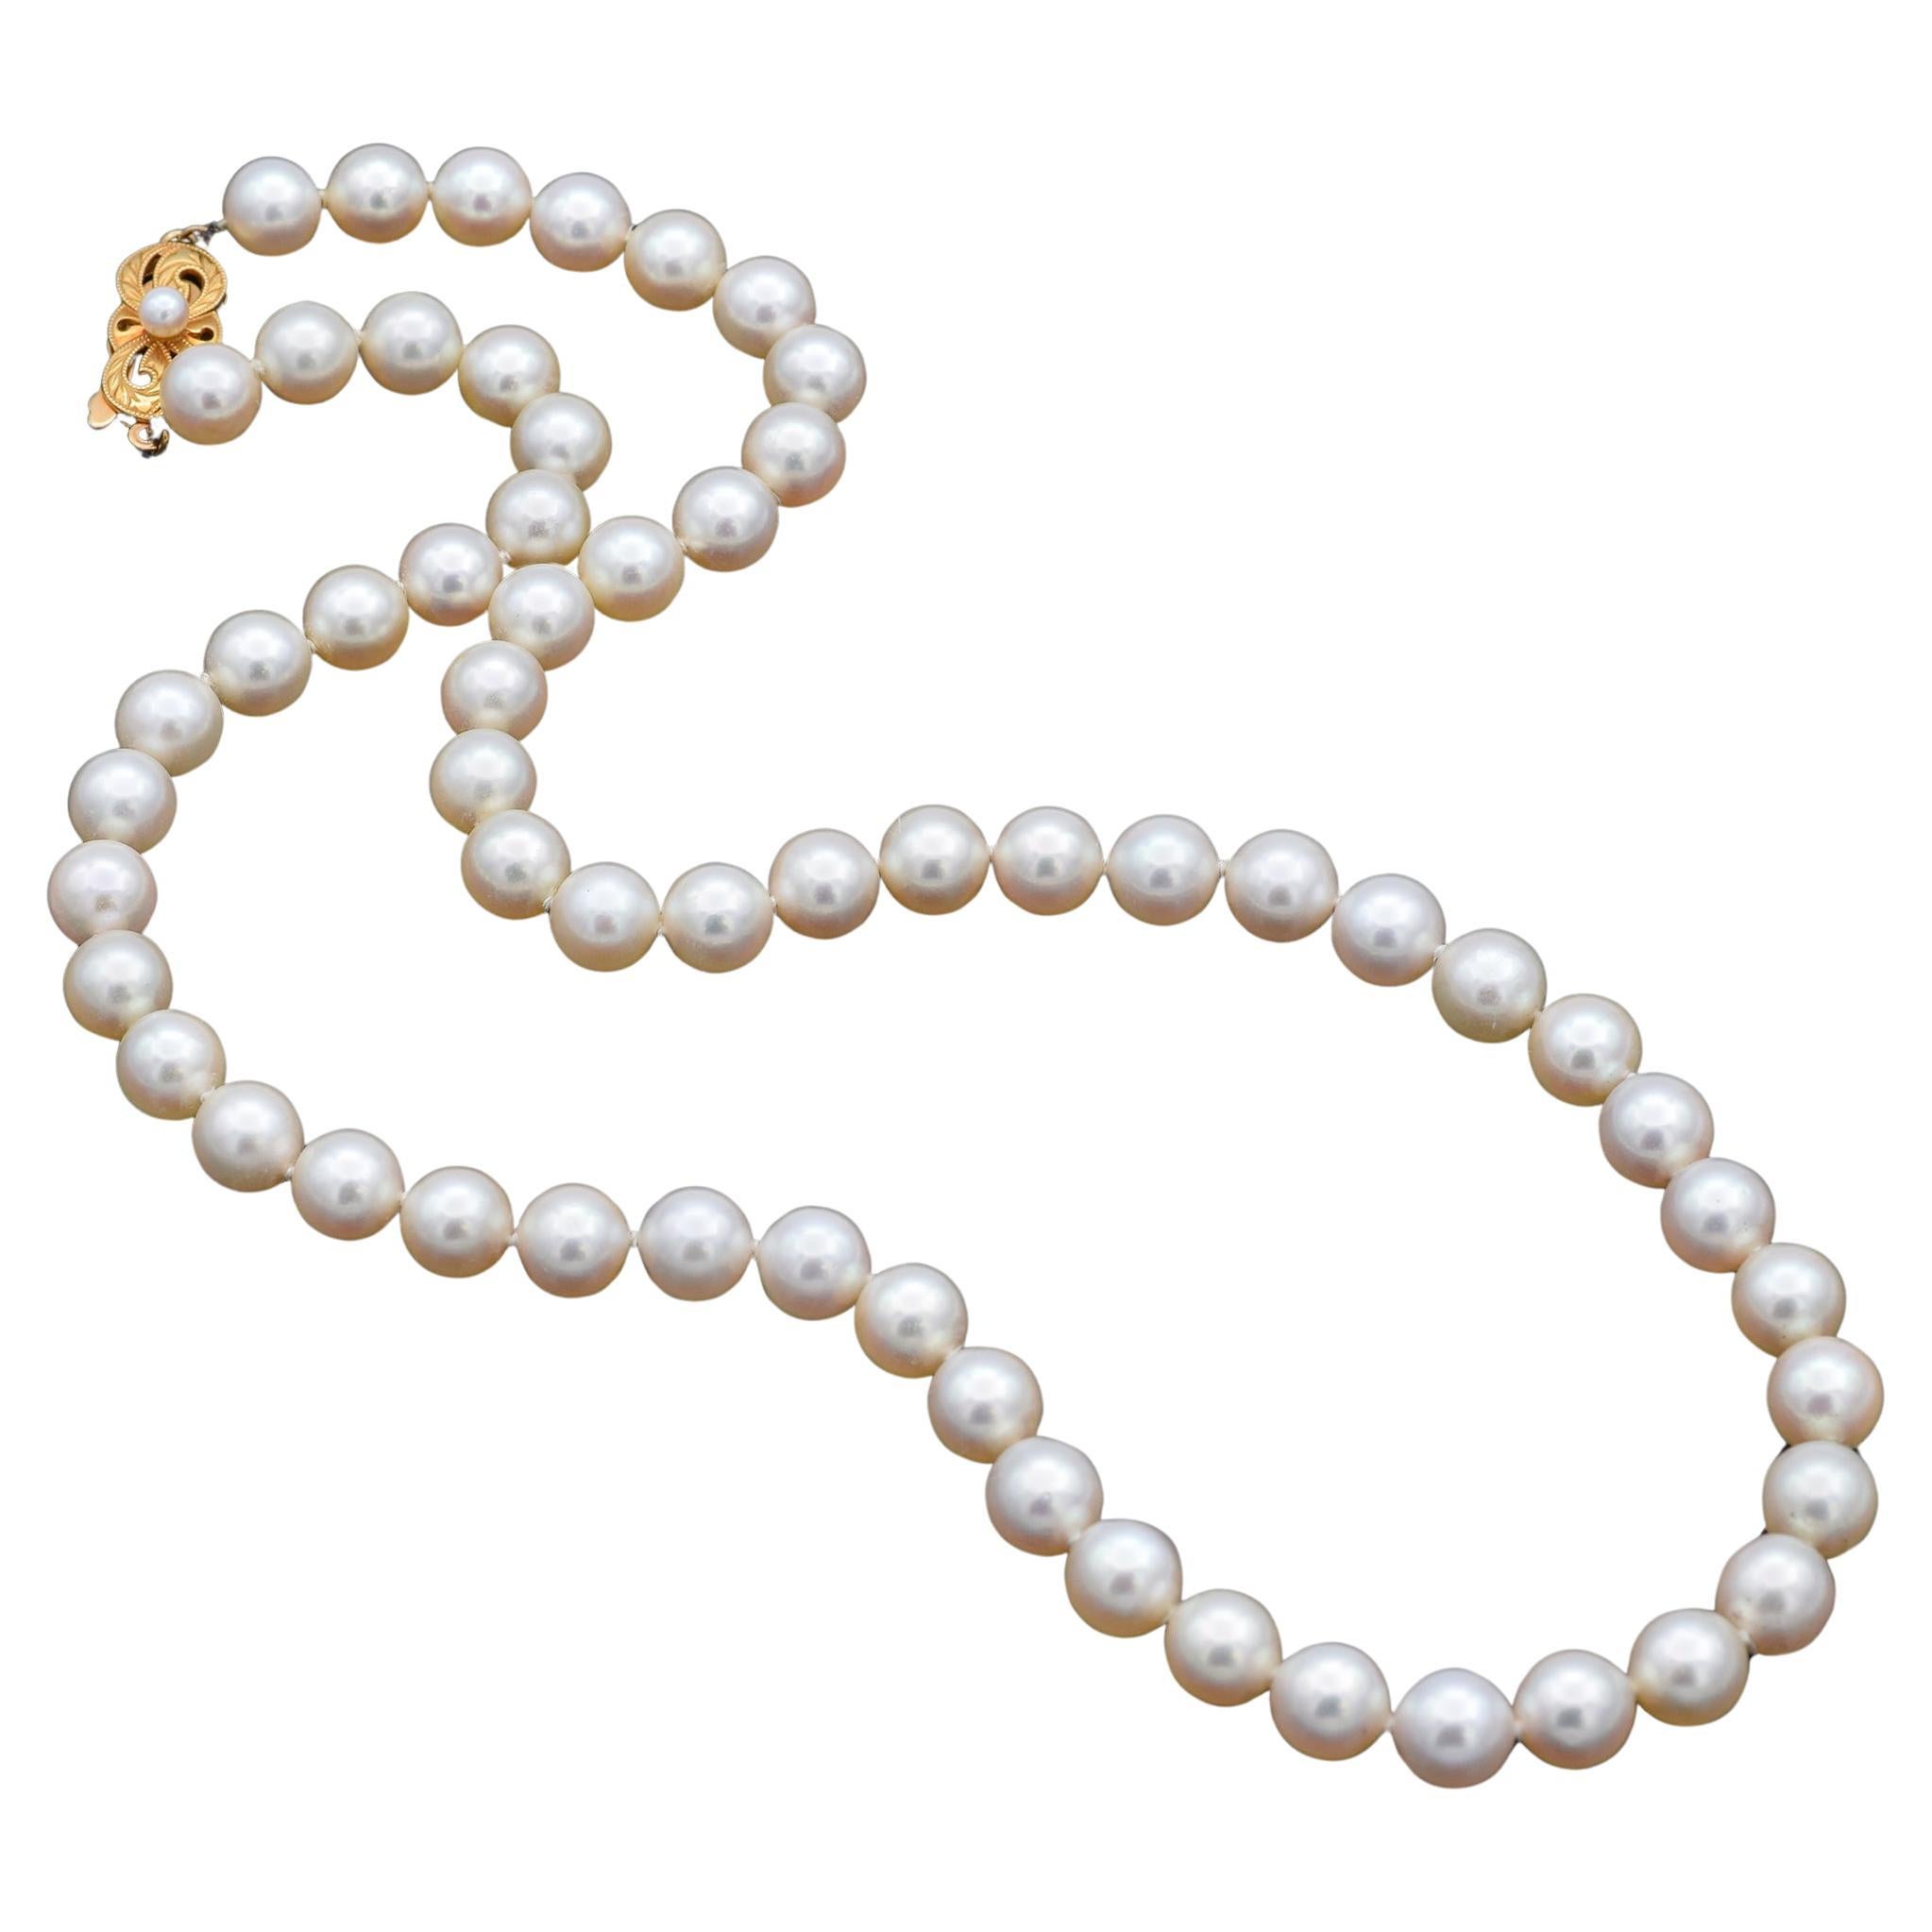 Sold at Auction: Chanel - 10 Strand Pearl Necklace - Large - Multi-stone  White - CC gold